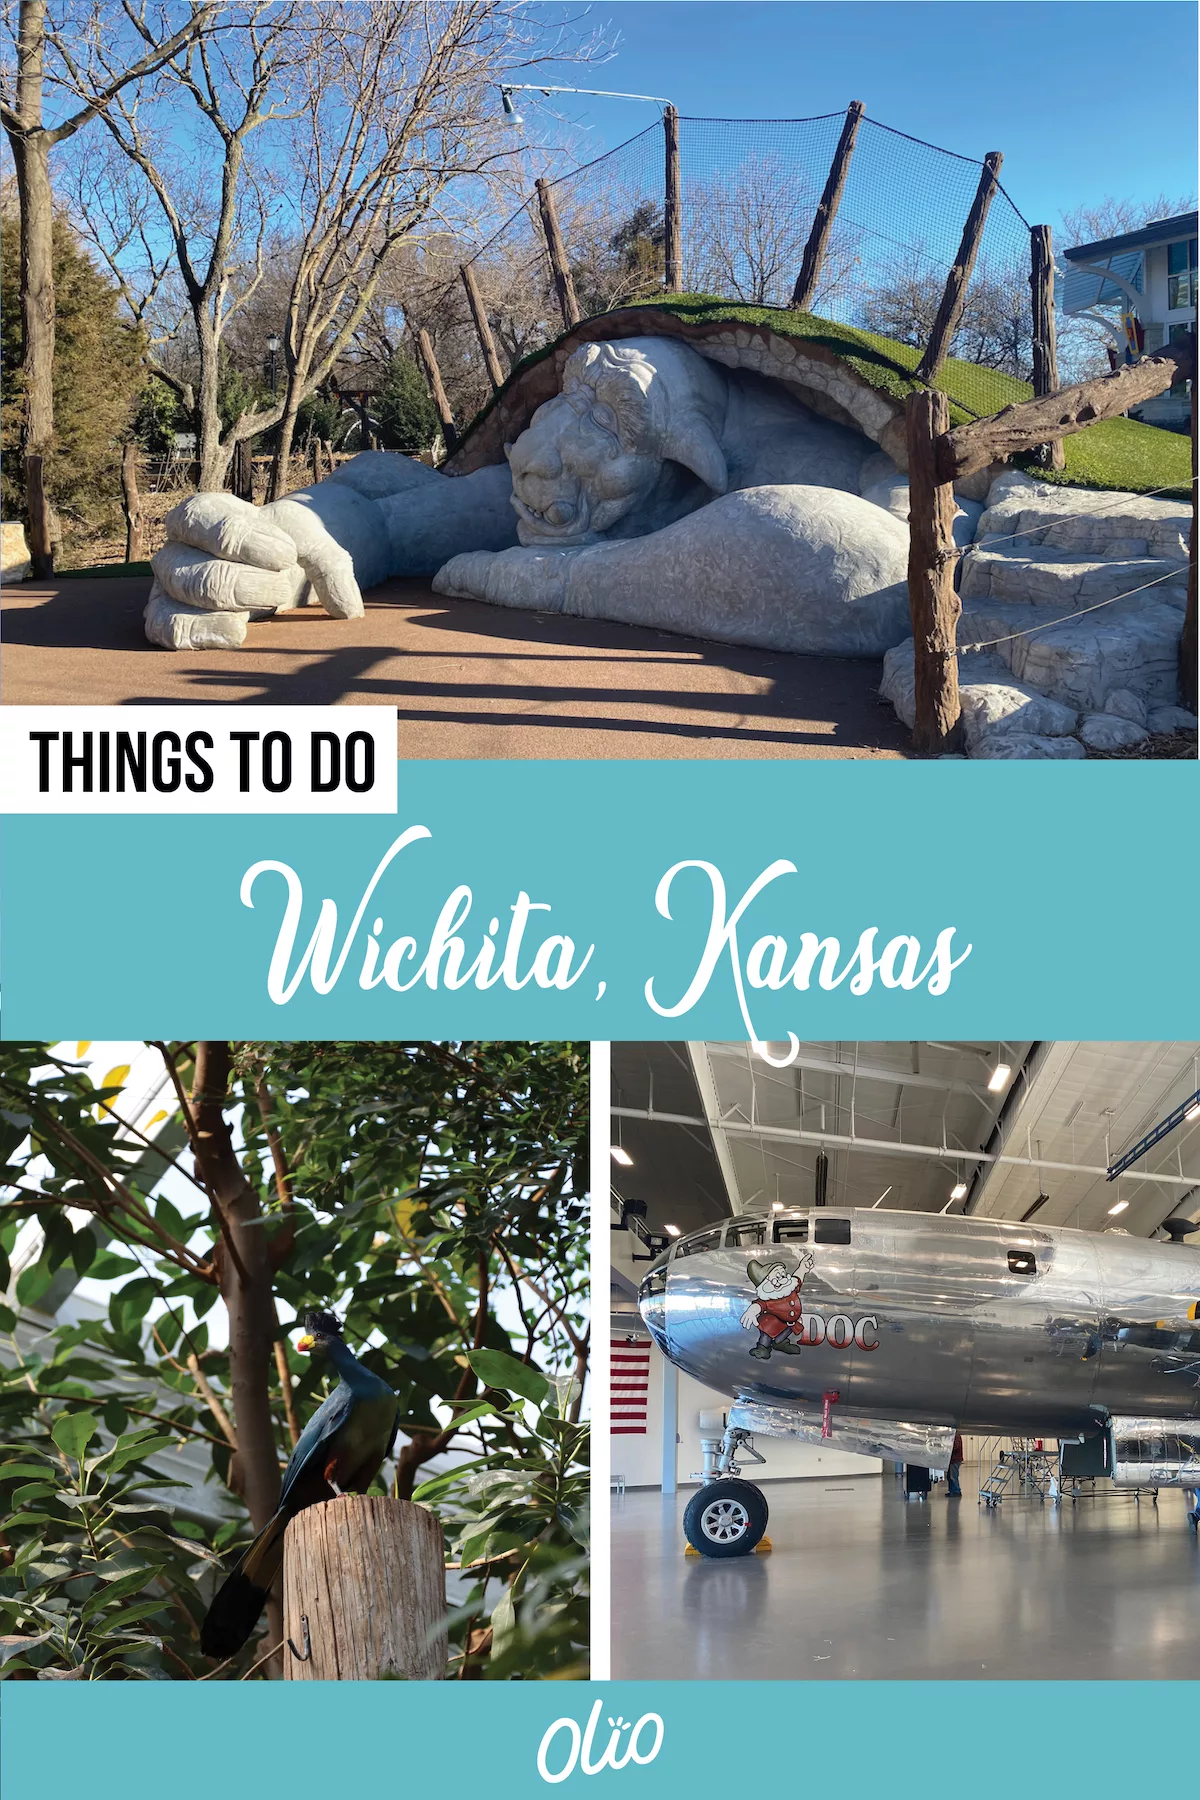 Before you claim that there's nothing to do in "flyover country," take the time to look and discover these 20 terrific things to do in Wichita, Kansas. From visiting the Keeper of the Plains to enjoying amazing restaurants and breweries and more, there are lots of things to see and places to visit in Wichita.